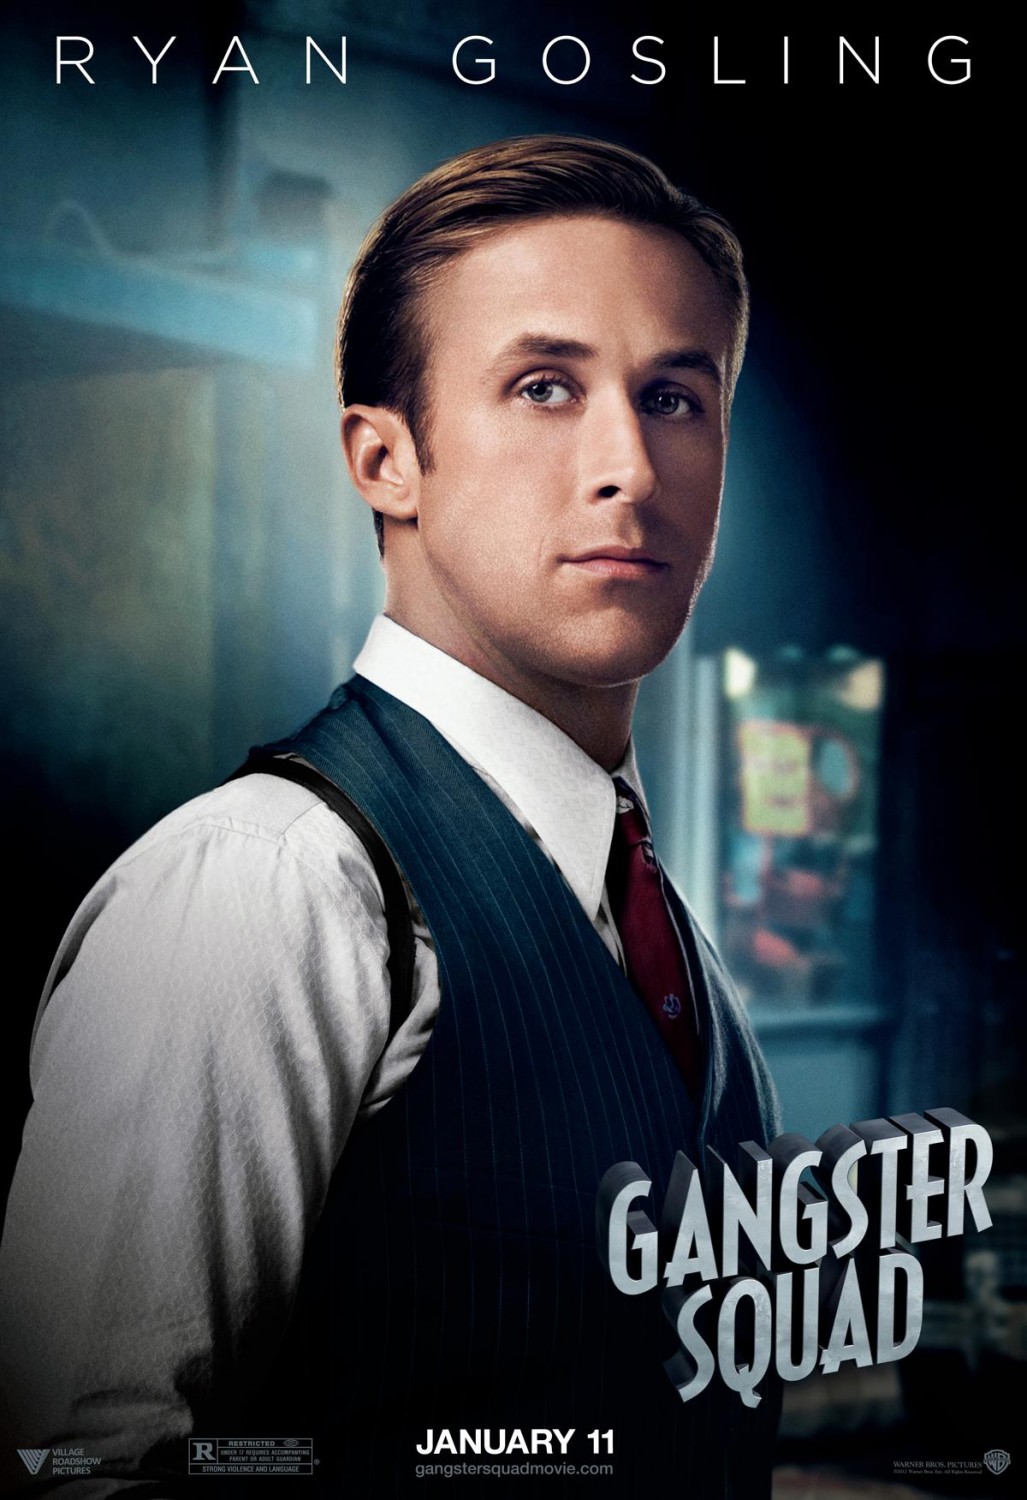 Nice Images Collection: Gangster Squad Desktop Wallpapers